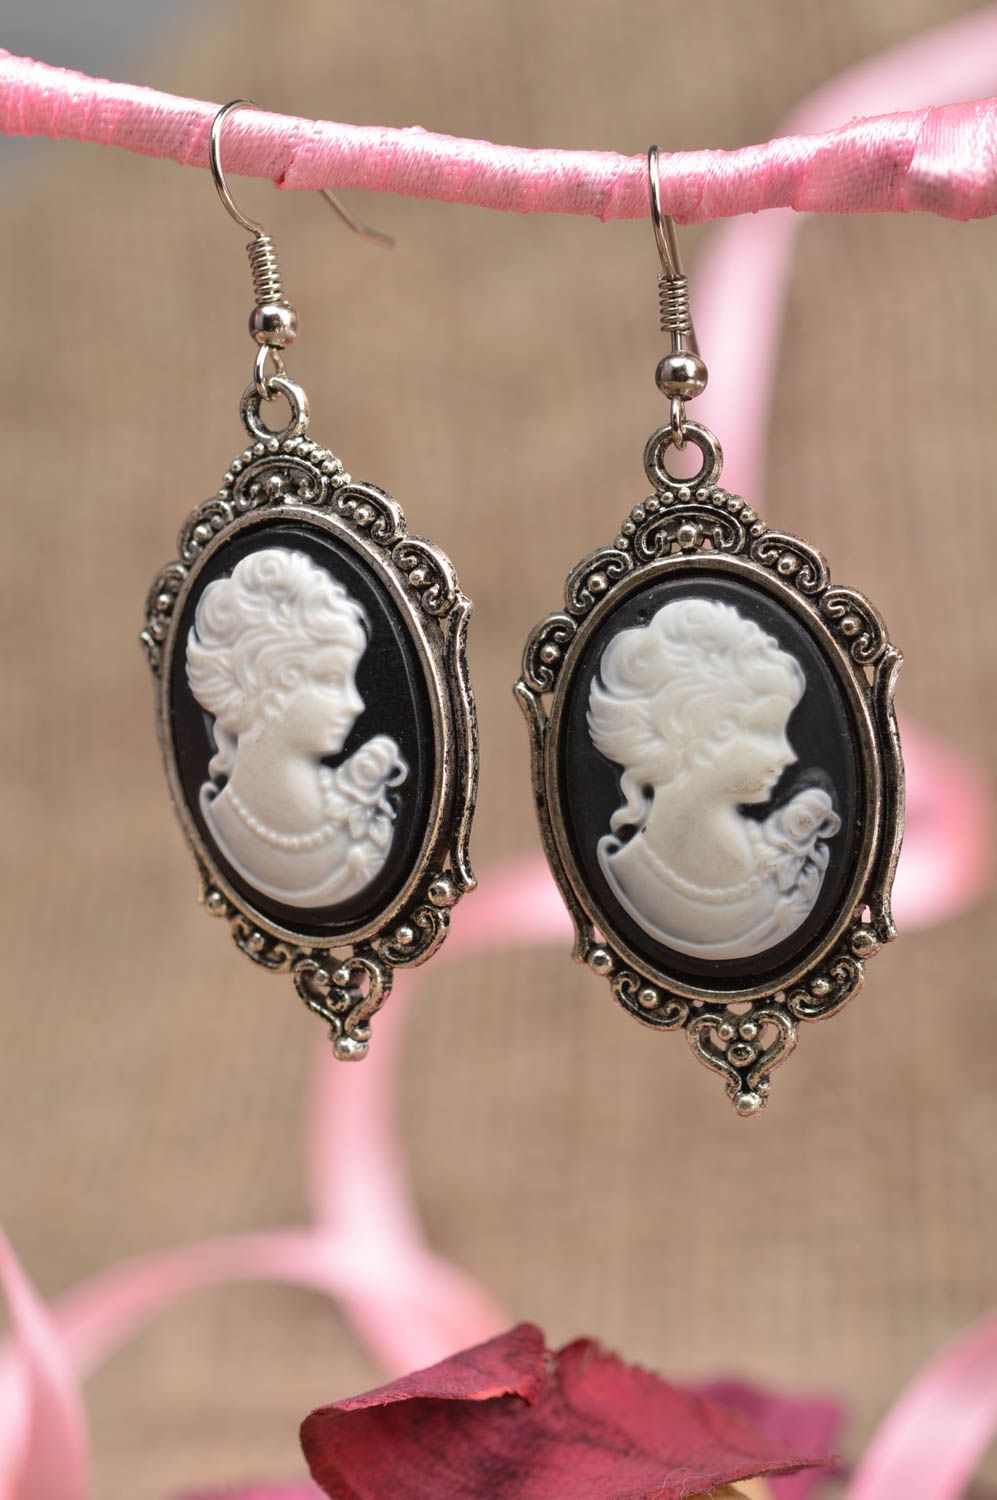 Handmade cute oval metal earrings with cameos in vintage style for girls photo 1